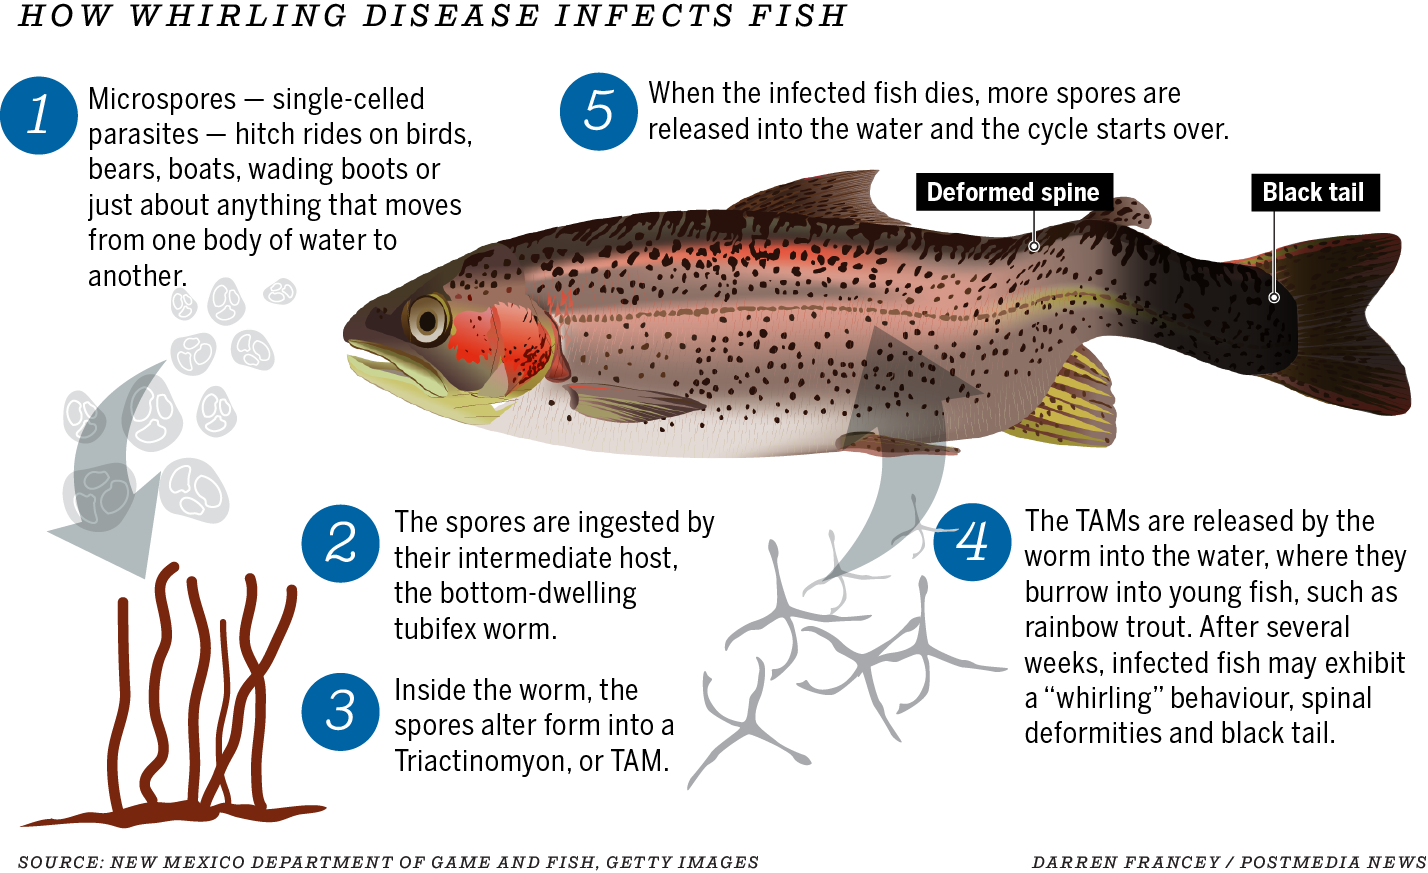 Graphic shows how whirling disease infects fish.